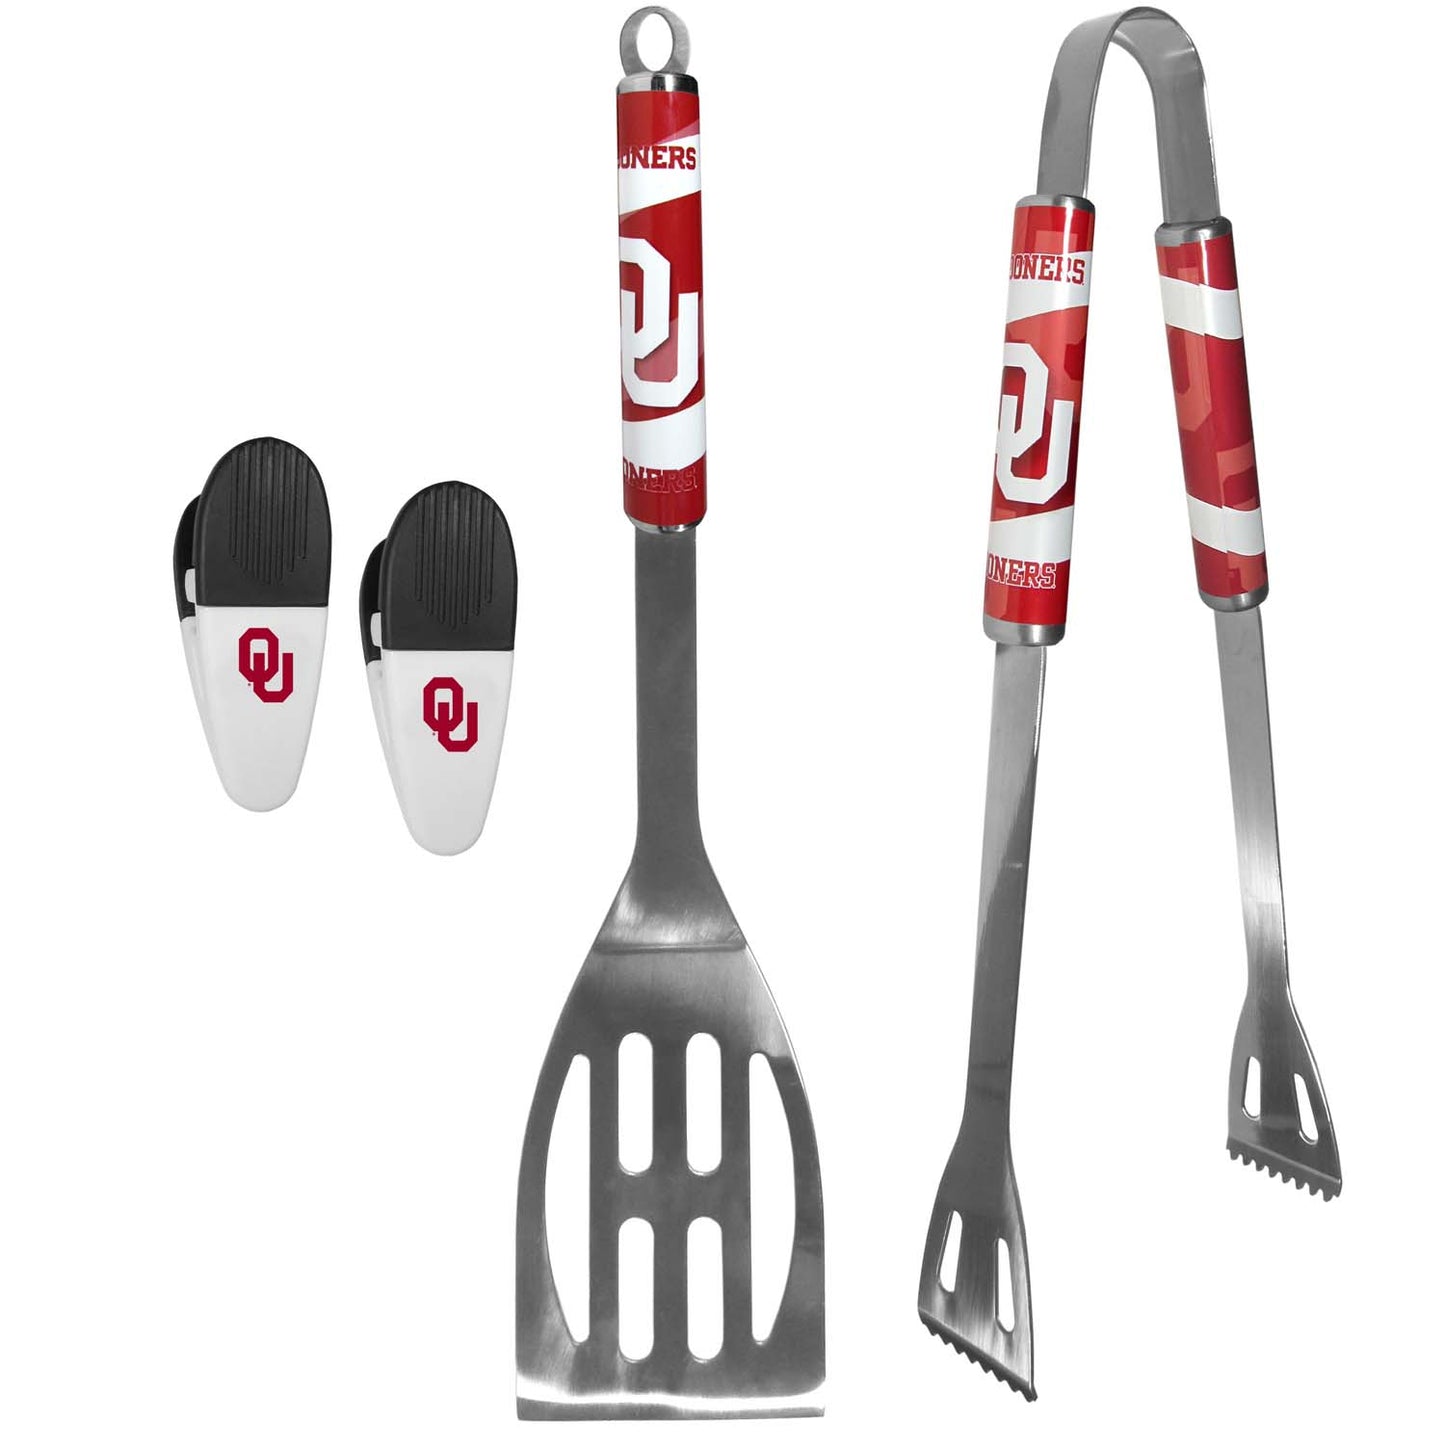 Oklahoma Sooners Collegiate University Two Piece Grilling Tools Set with 2 Magnet Chip Clips - Chrome